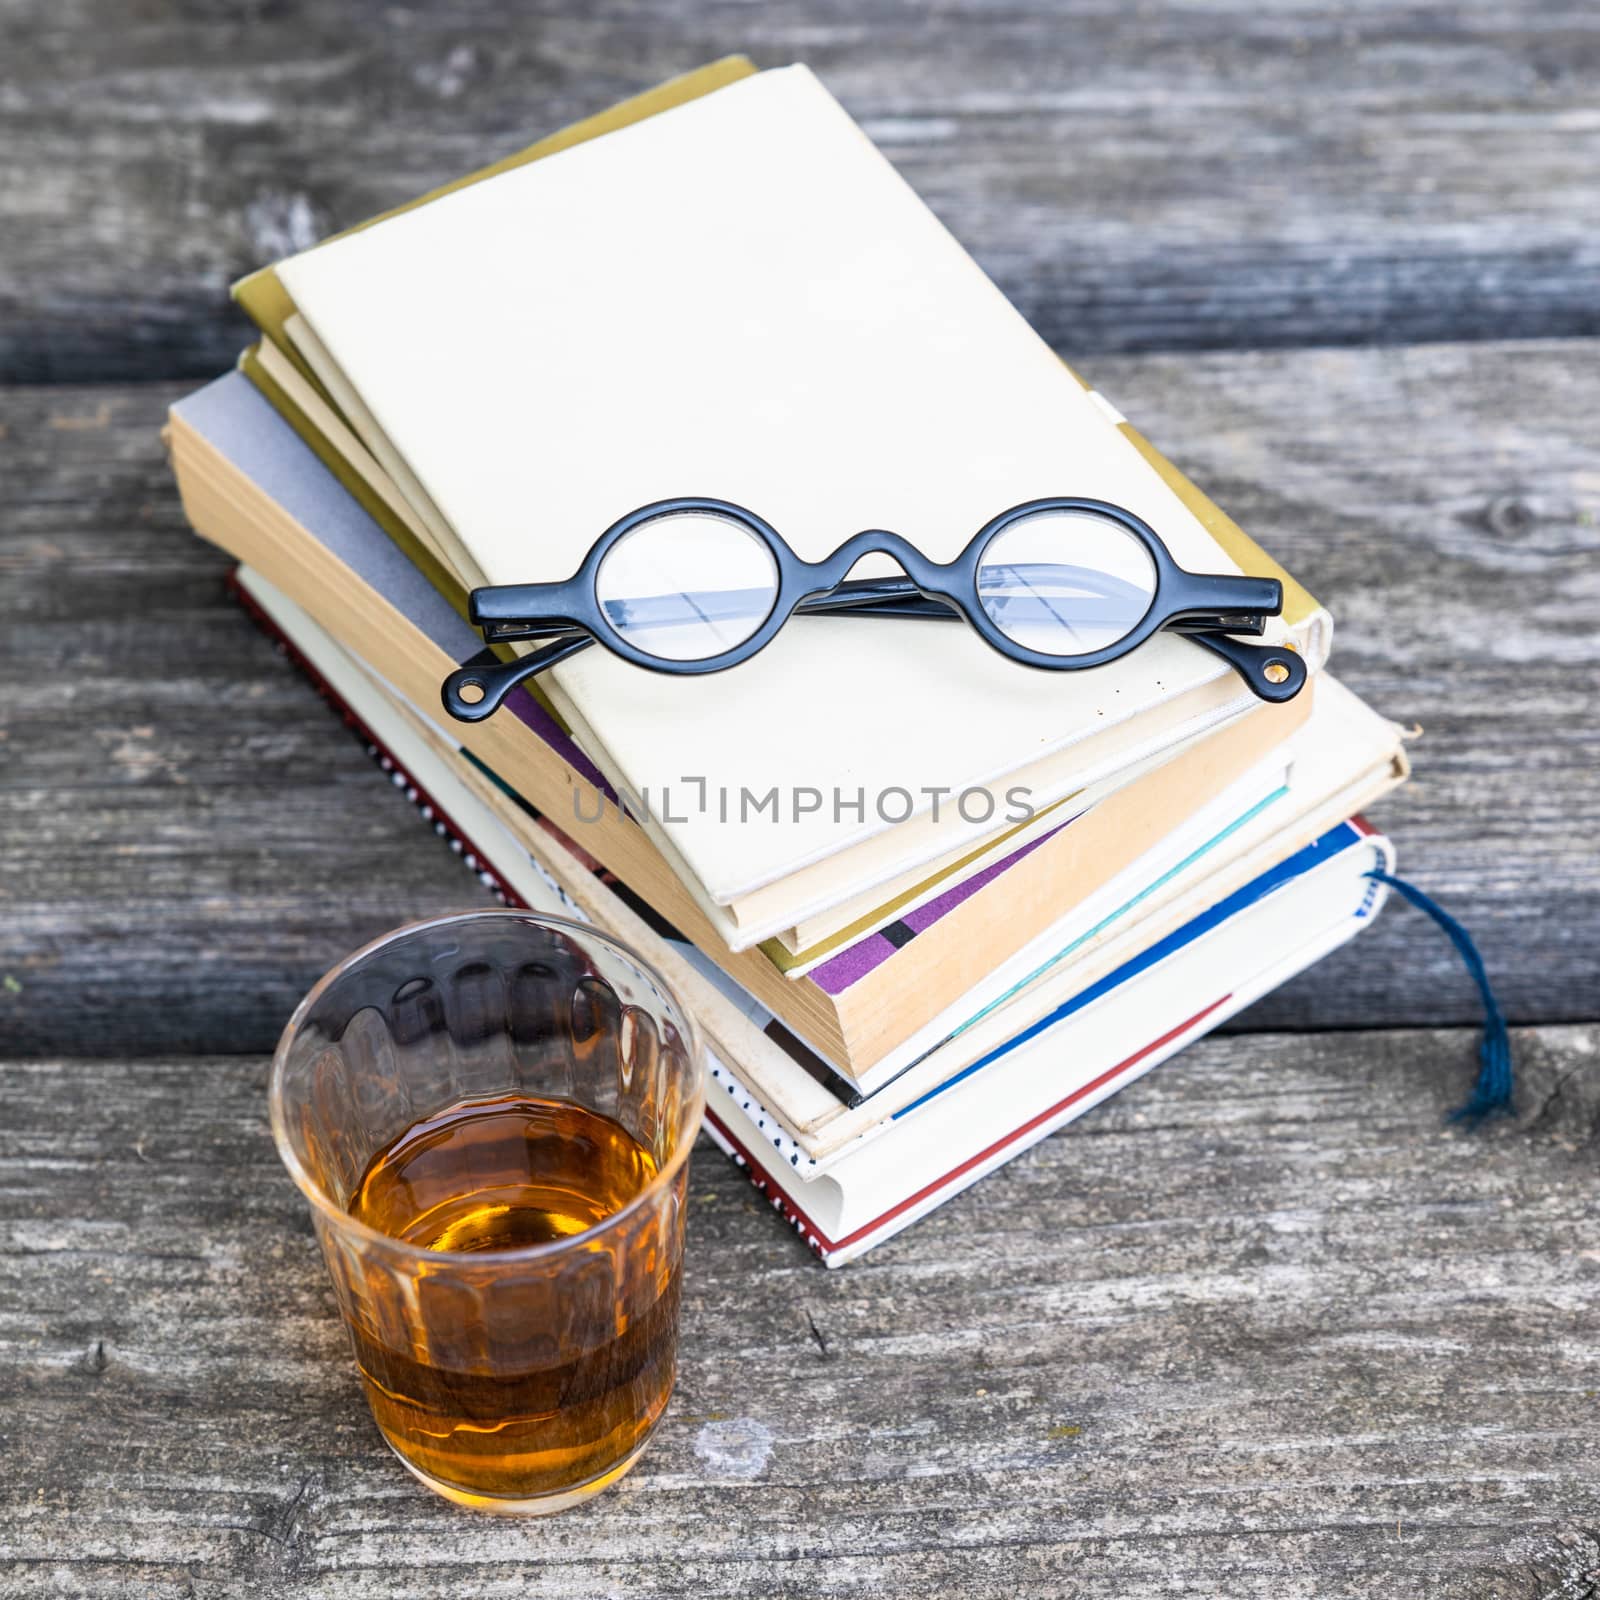 An image of some books and reading glasses background